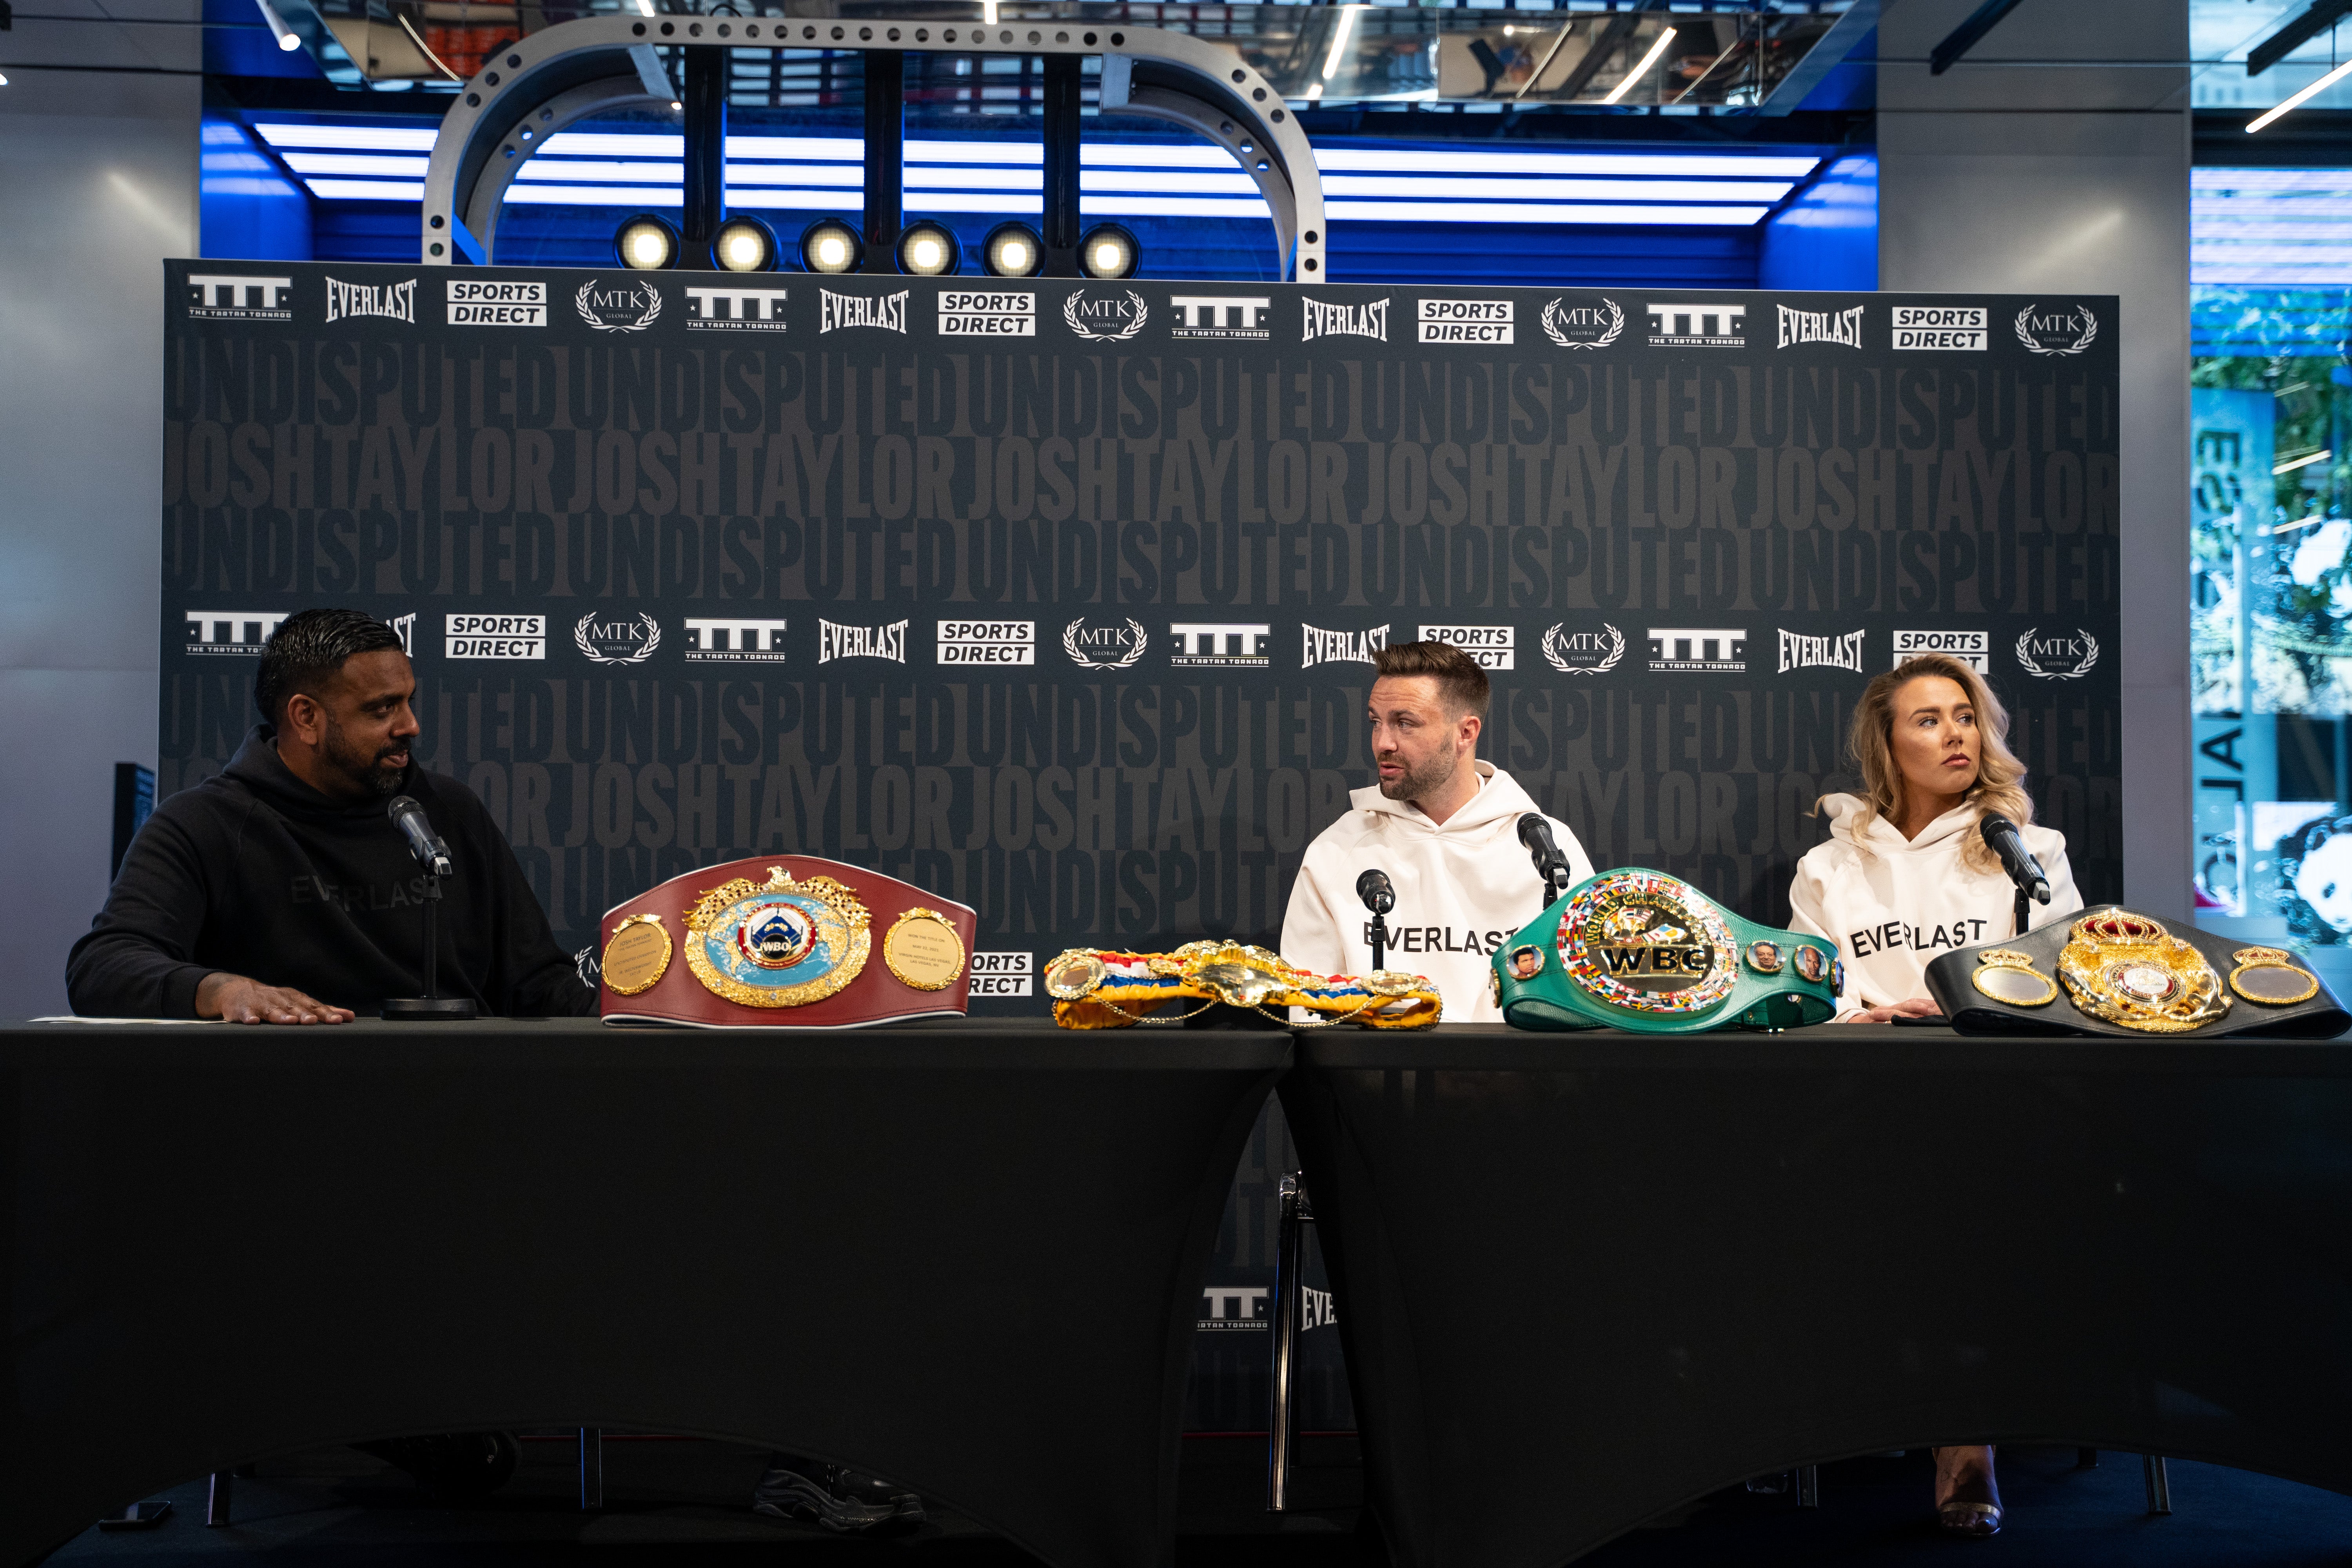 Josh Taylor speaks to the media following his world title victory over Jose Ramirez to become undisputed champion